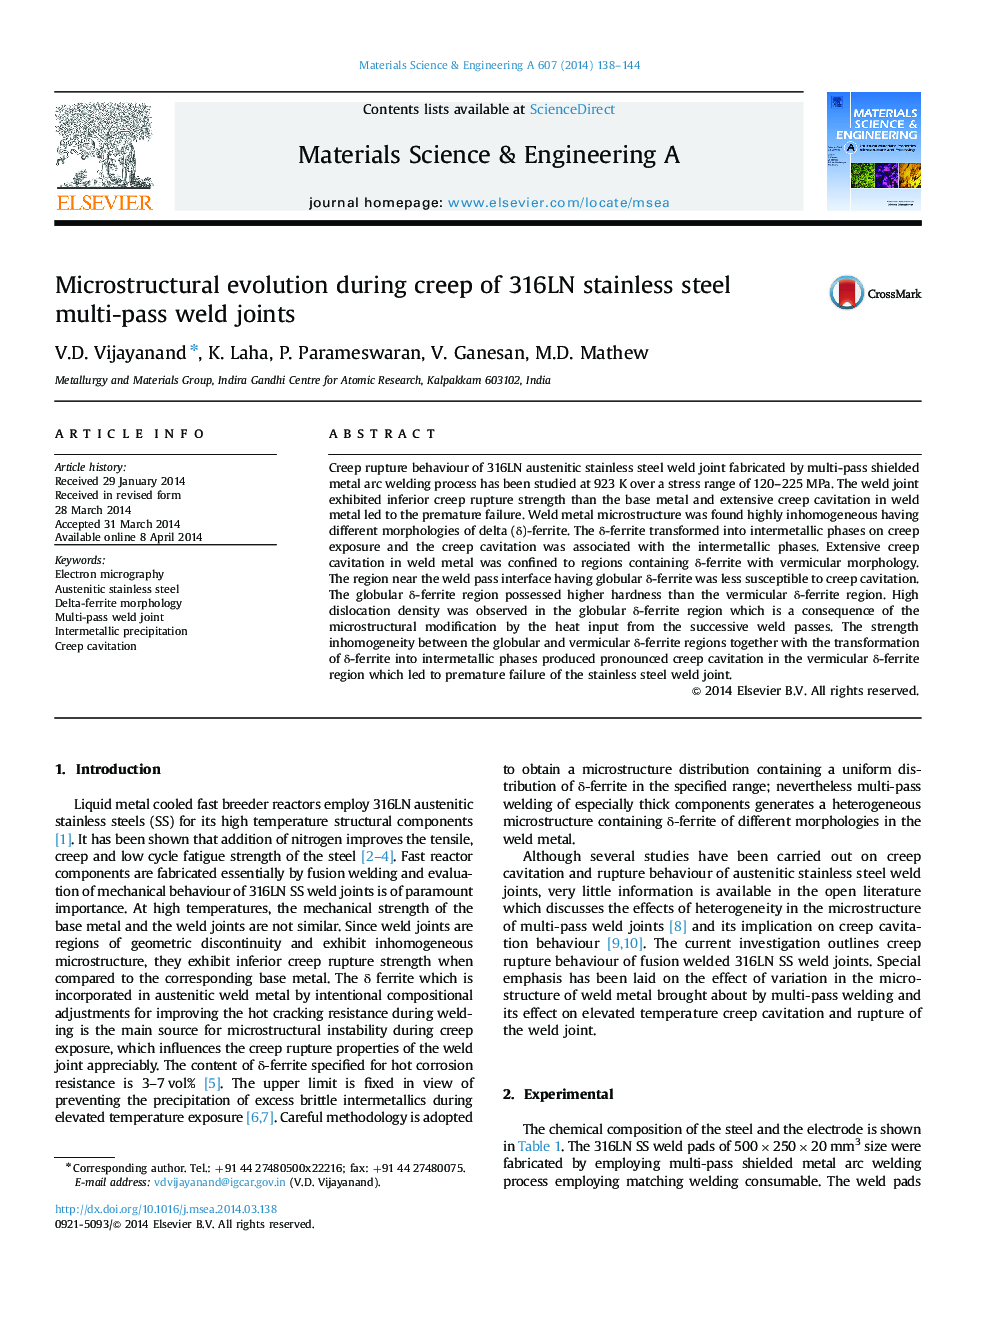 Microstructural evolution during creep of 316LN stainless steel multi-pass weld joints